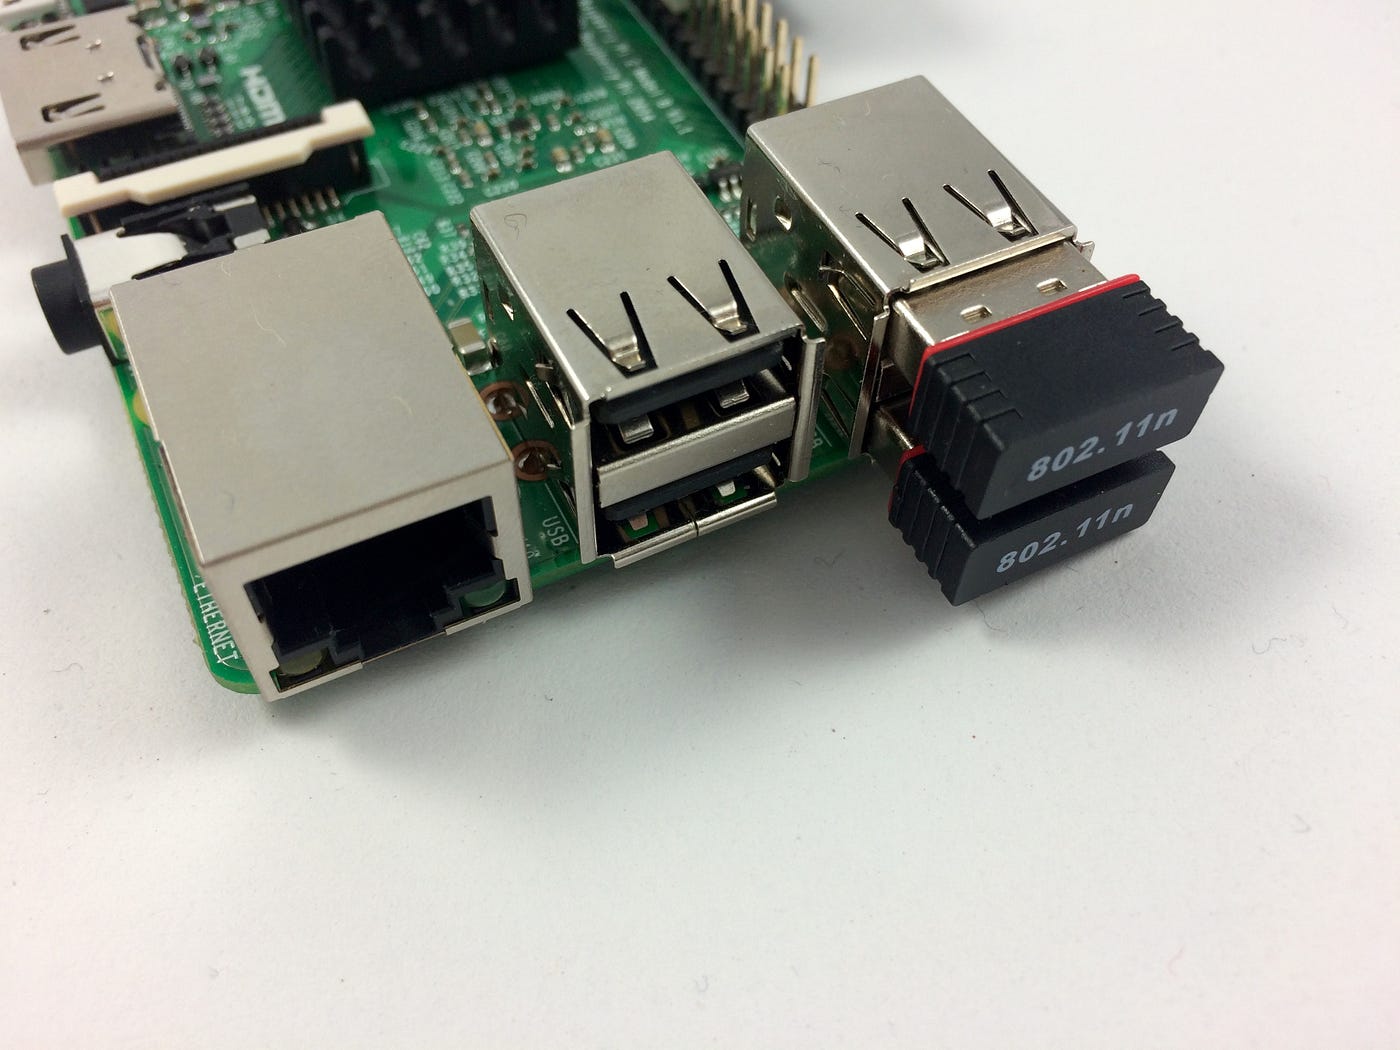 Adding a Second Wireless Adaptor to a Raspberry Pi for Network Monitoring |  by Alasdair Allan | Medium